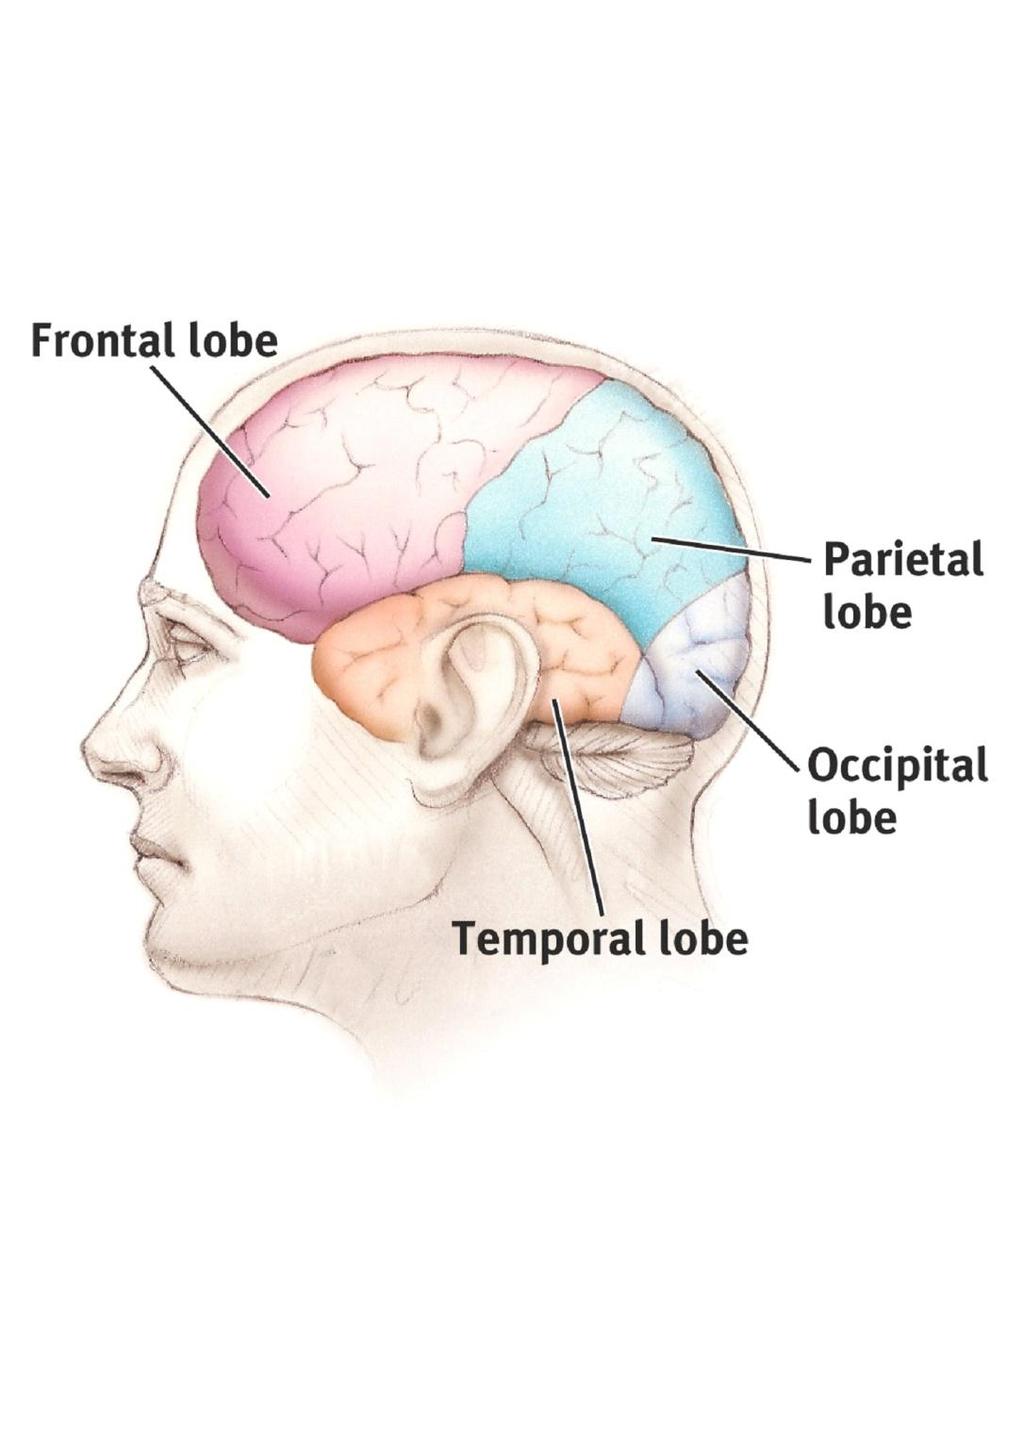 Structure of the Cortex Each brain hemisphere is divided into four lobes that are separated by prominent fissures.